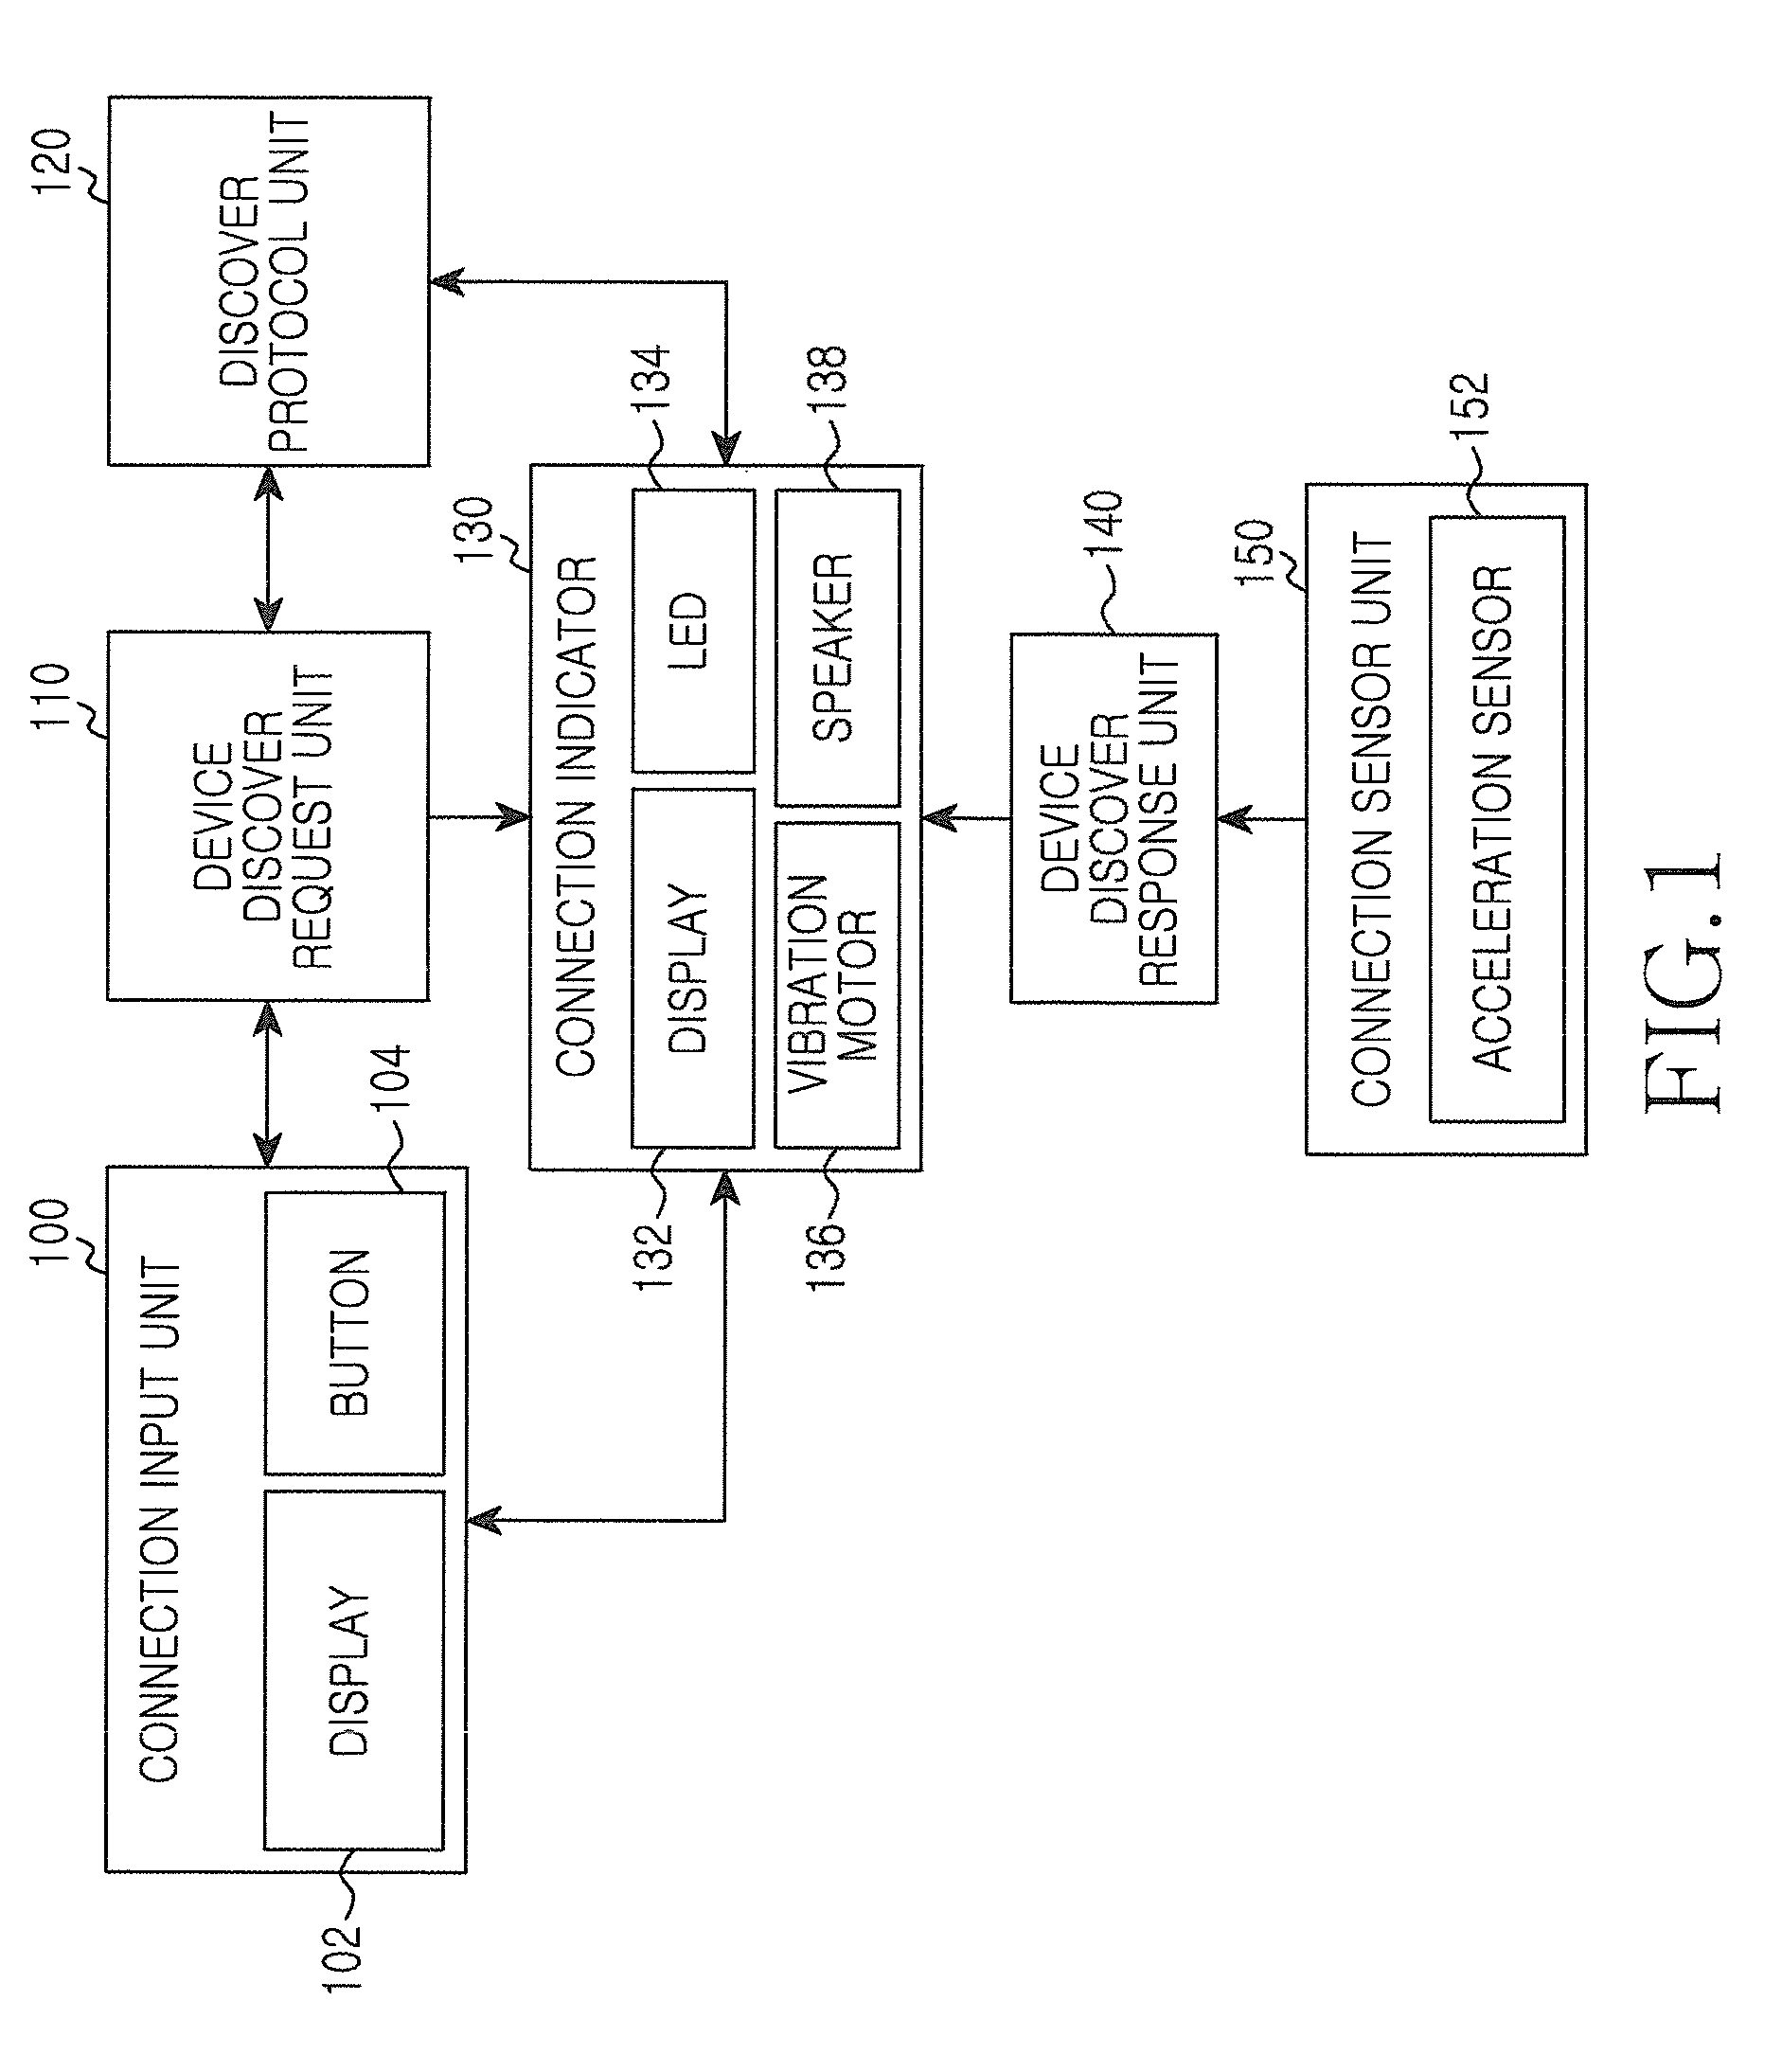 Apparatus and method for bidirectional pairing between devices